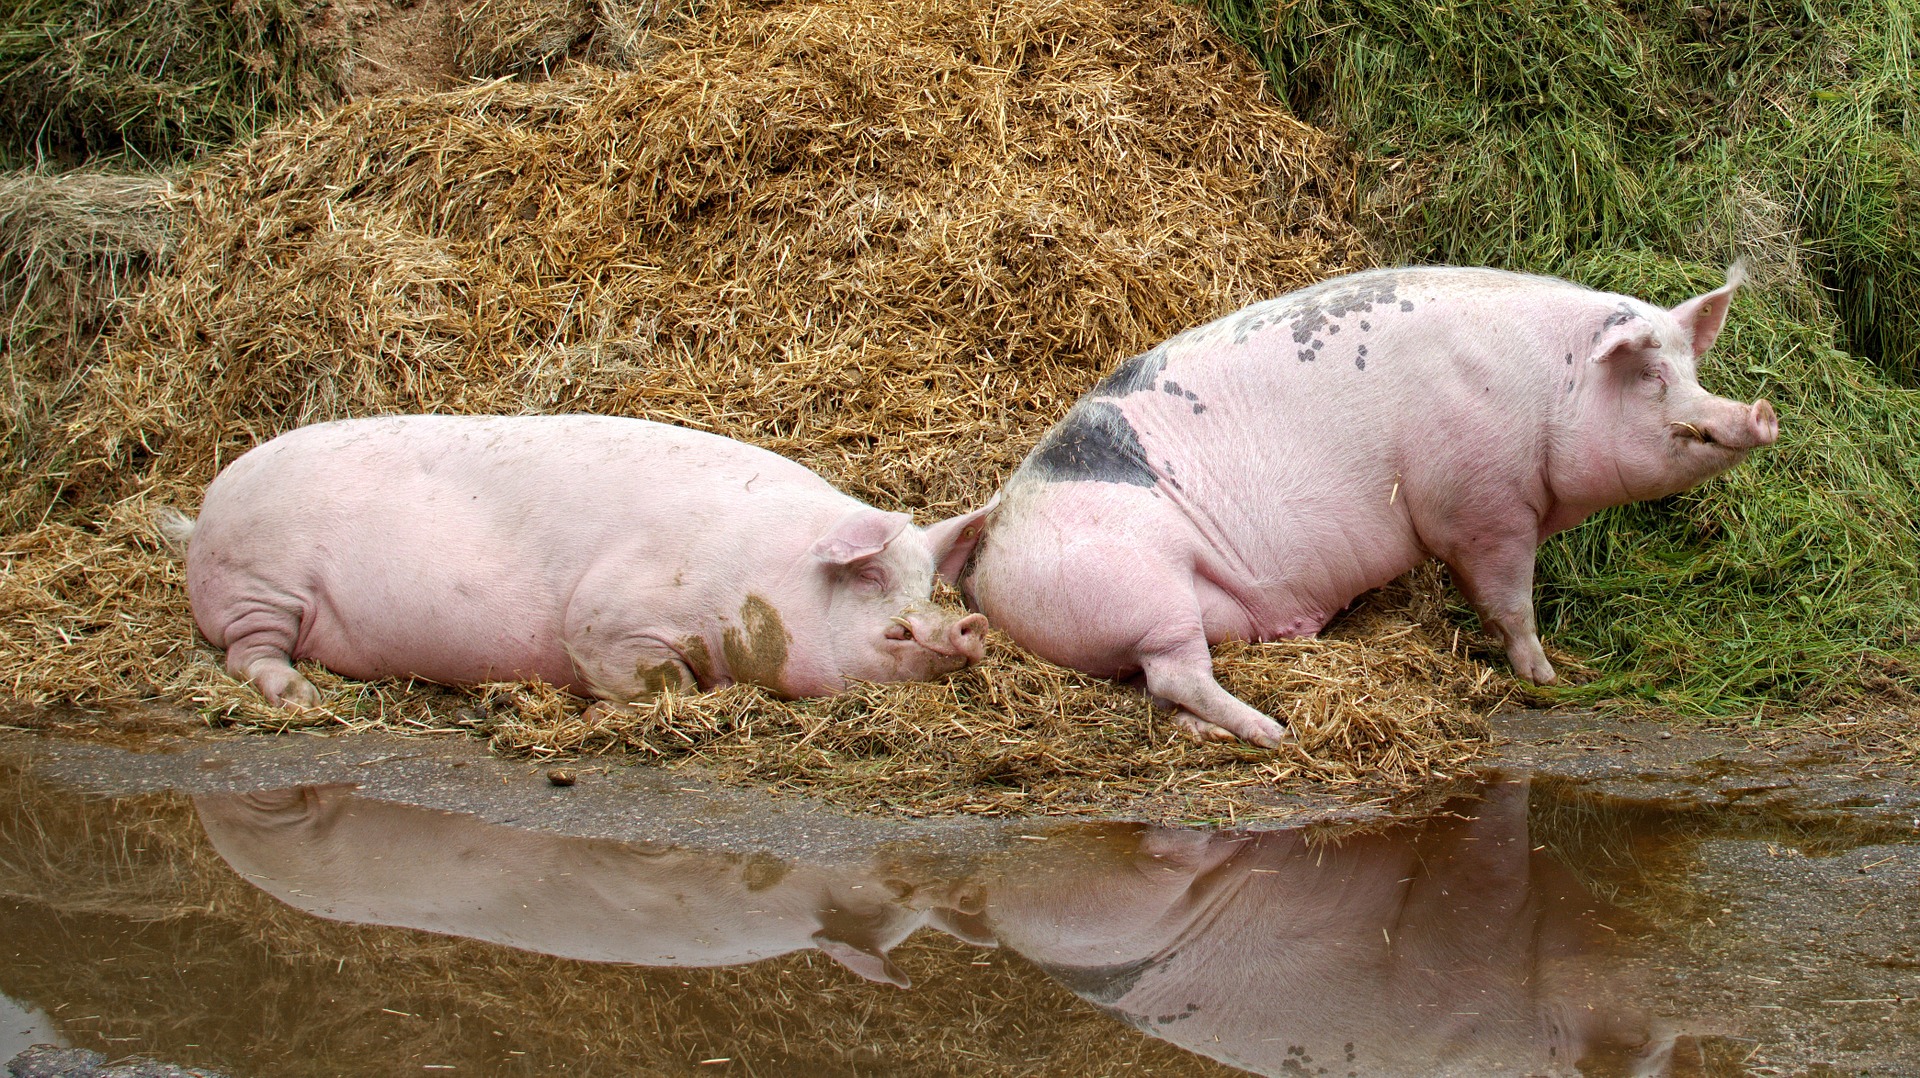 Pig culling continues with 30,000 animals killed since September - The Big  Issue